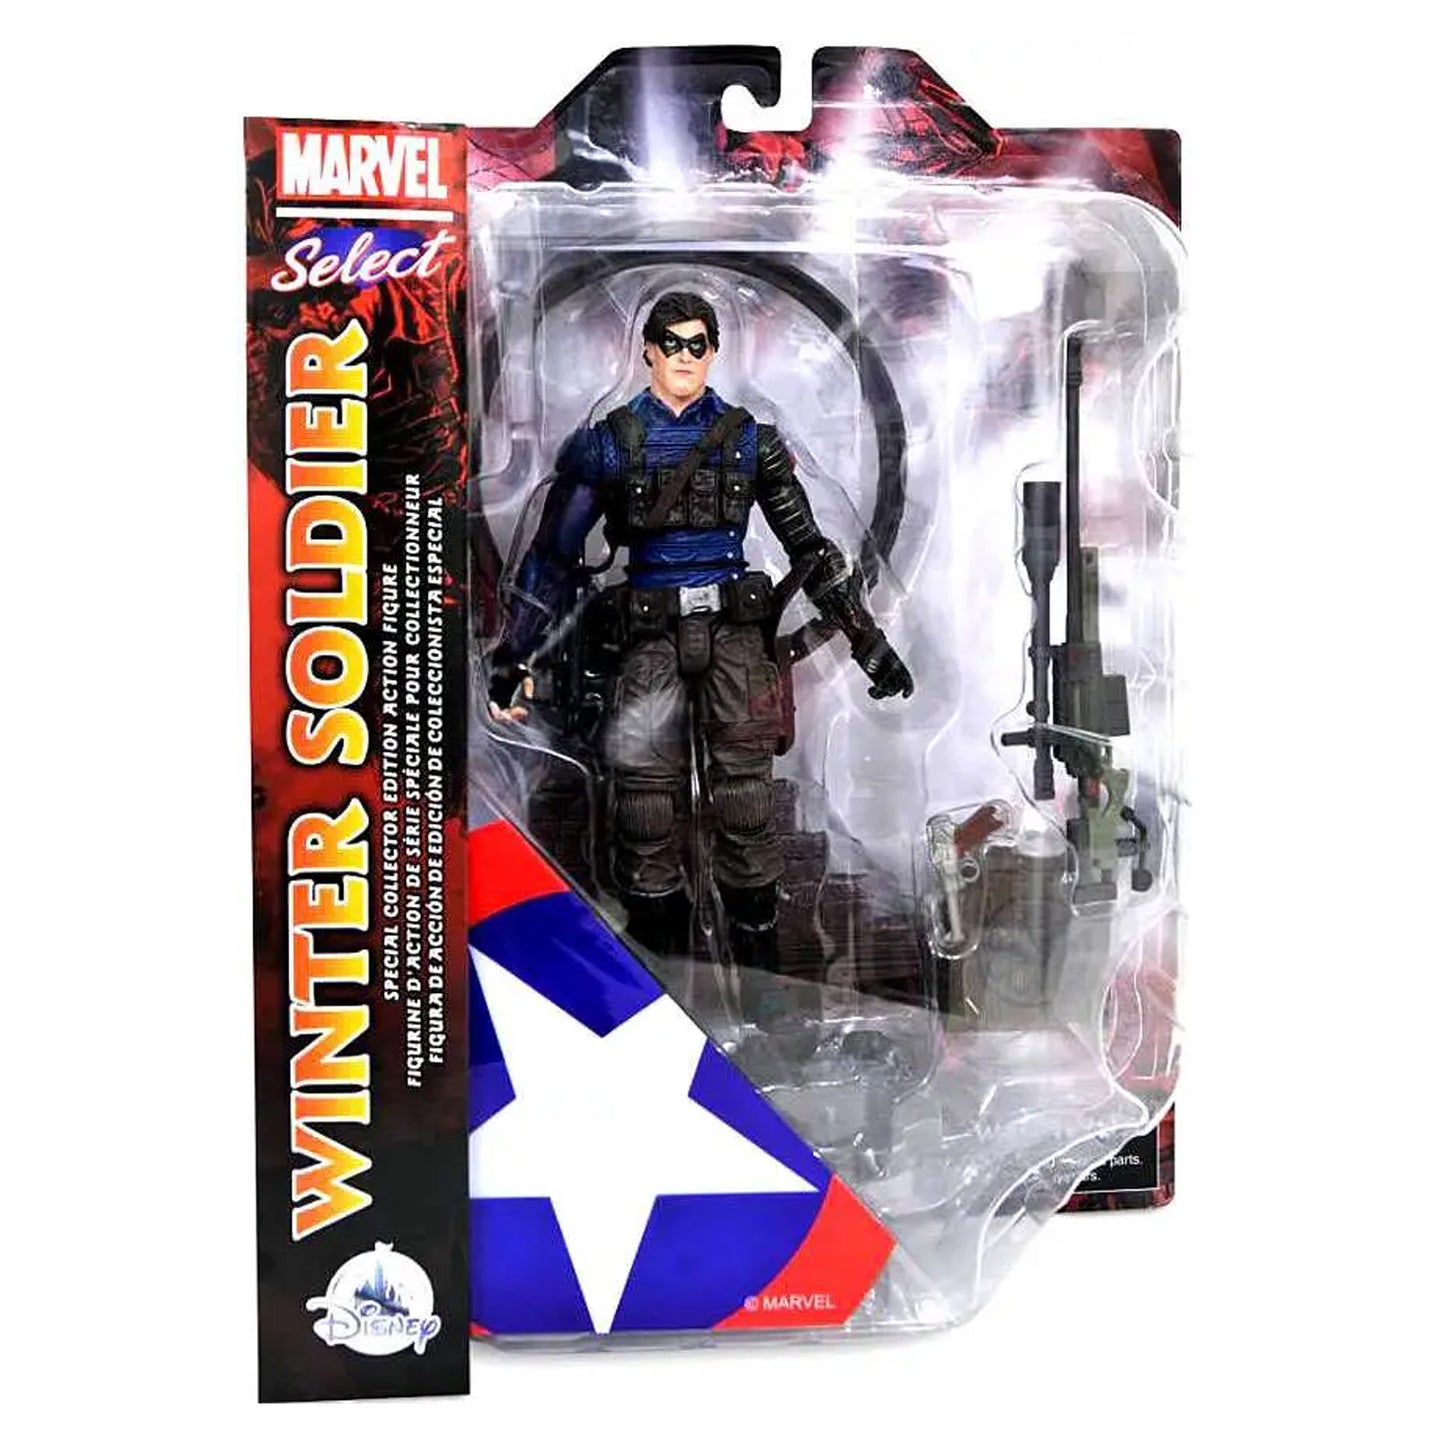 Marvel Select Winter Soldier EXCLUSIVO